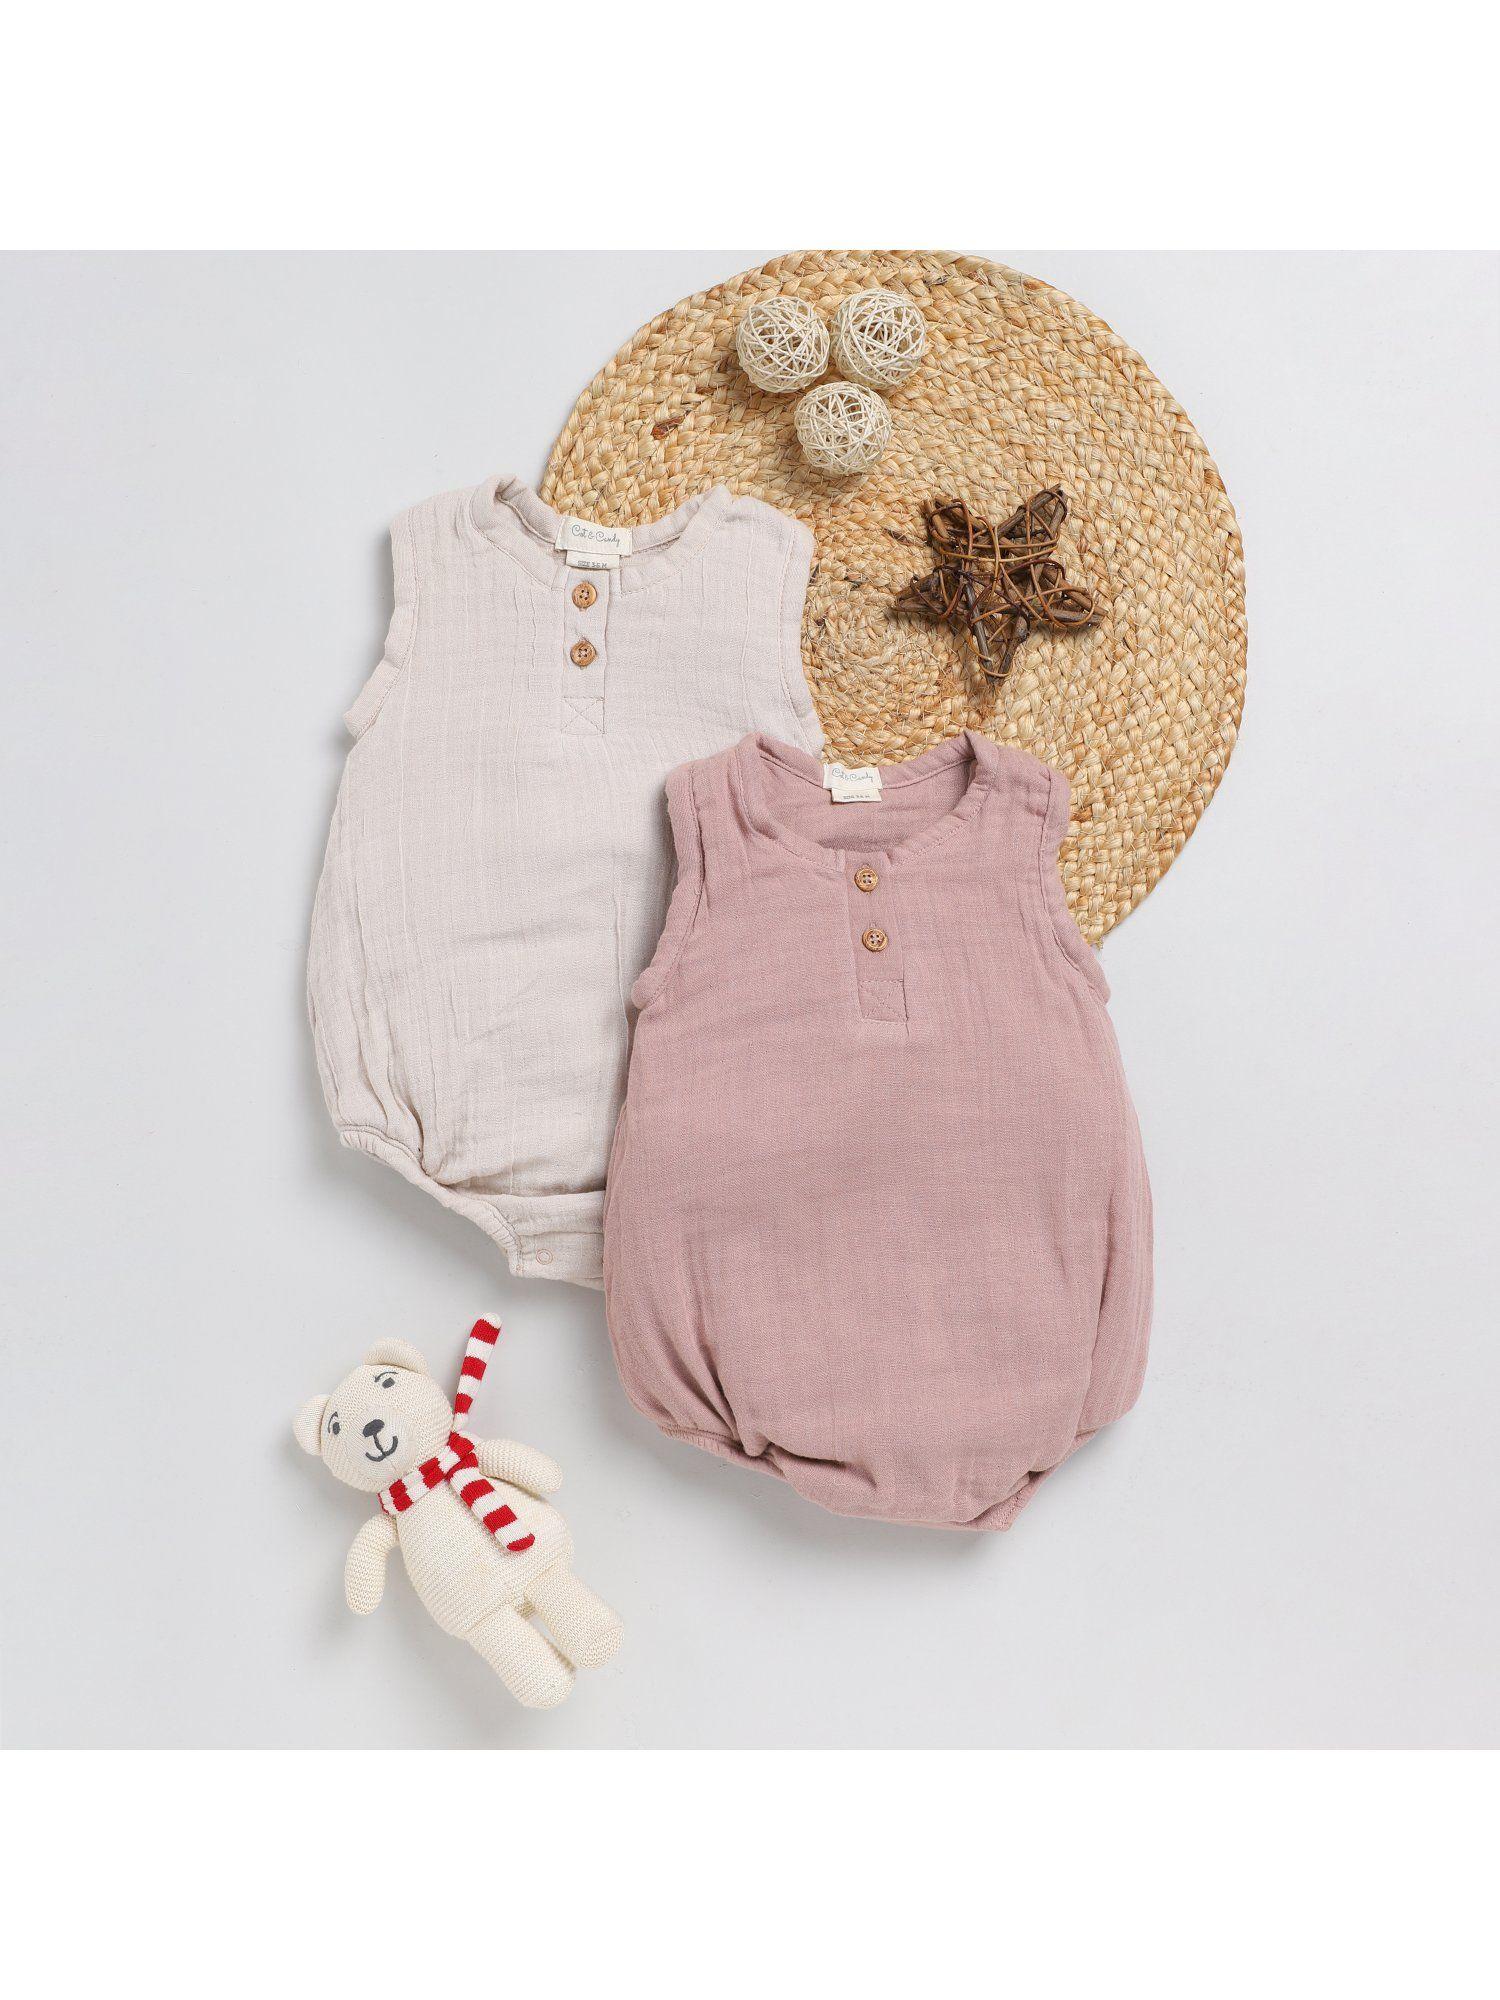 half-sleeve-oatmeal-&-blush-pink-bubble-romper-for-kids-(pack-of-2)